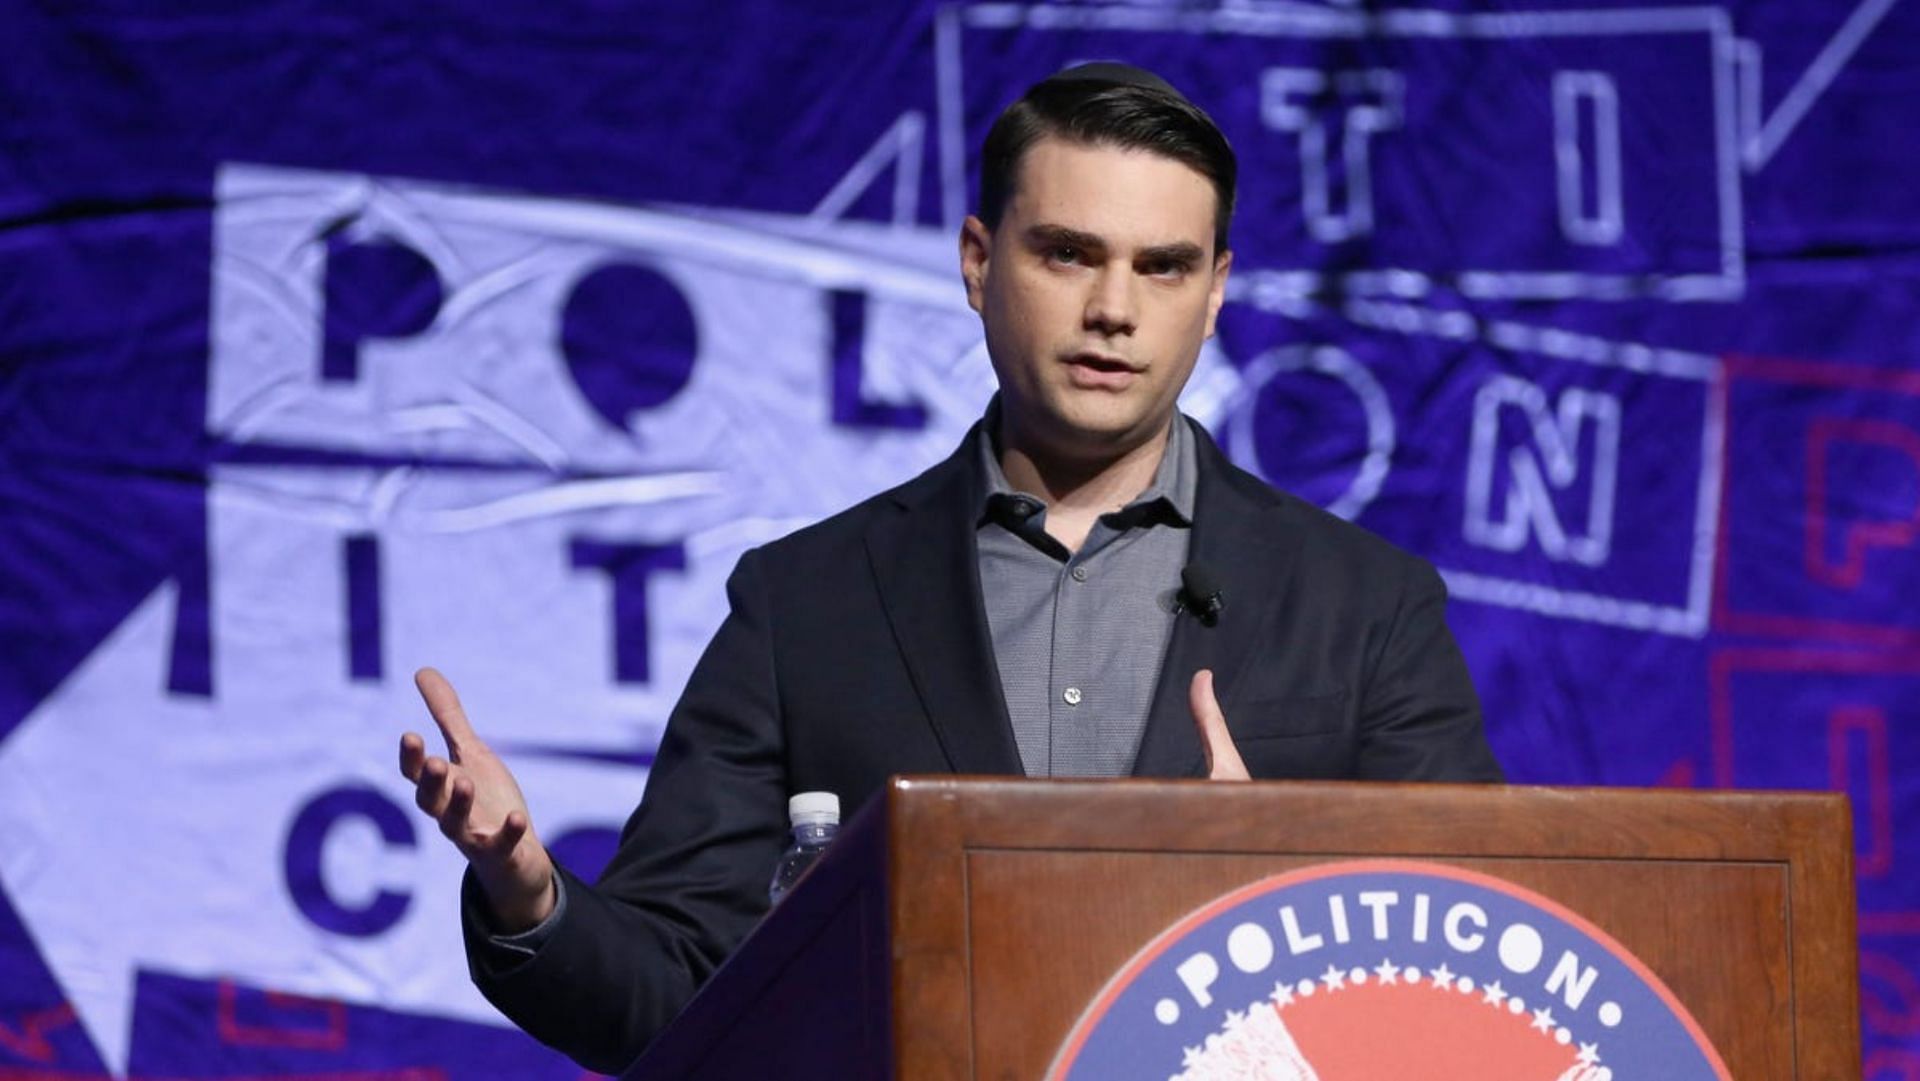 Ben Shapiro was bashed online for his thoughts on toxic masculinity. (Image via Getty Images/Politicon)